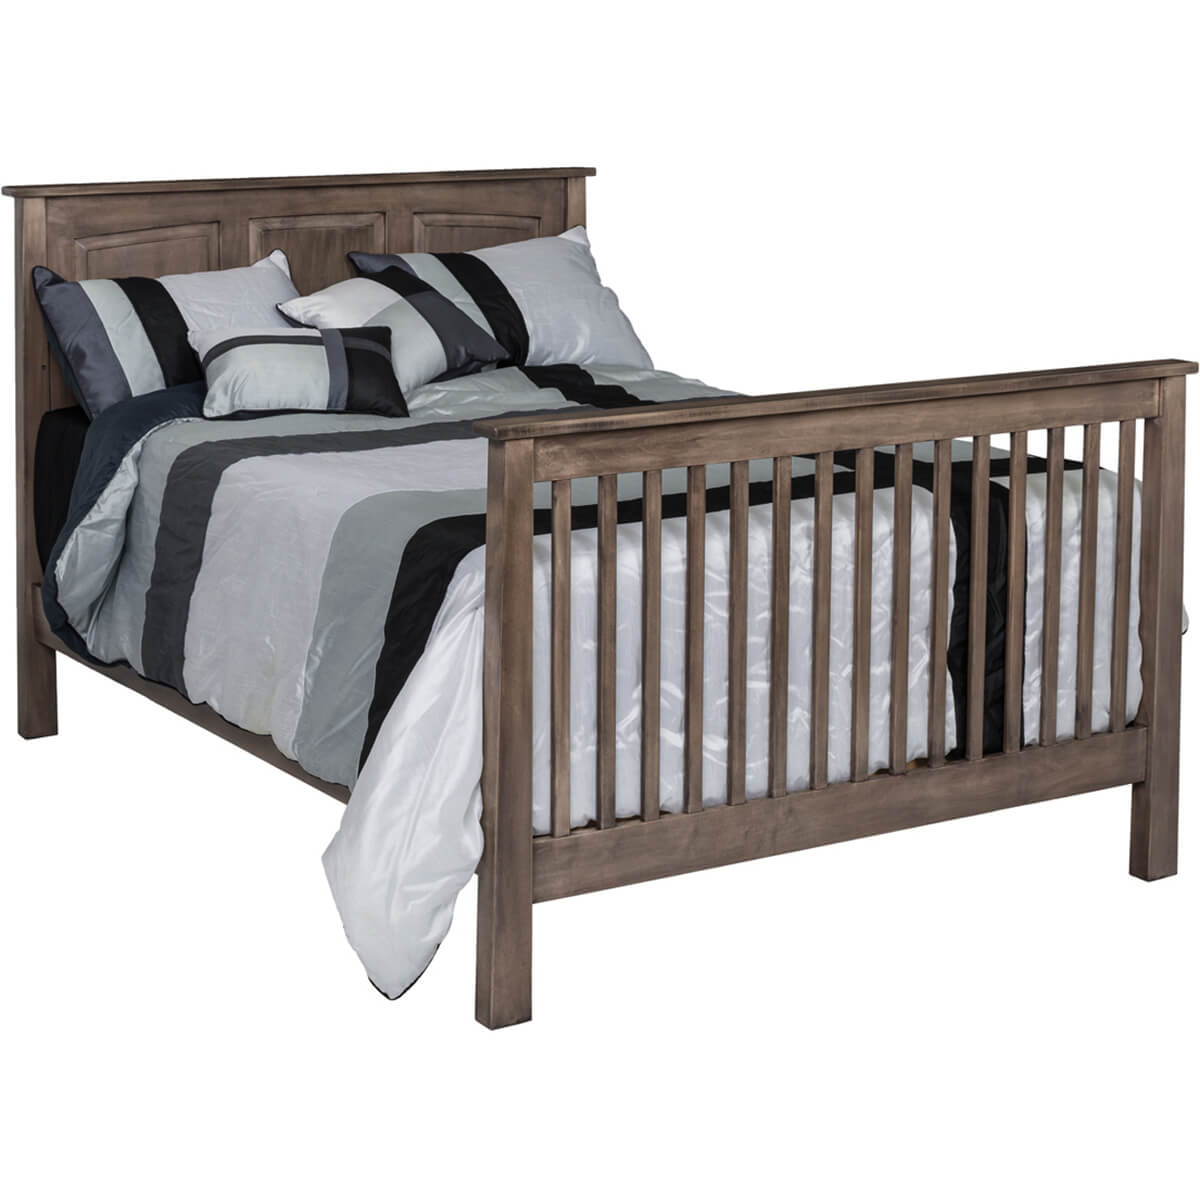 Read more about the article Shaker Panel Convertible Crib – Full Bed Conversion